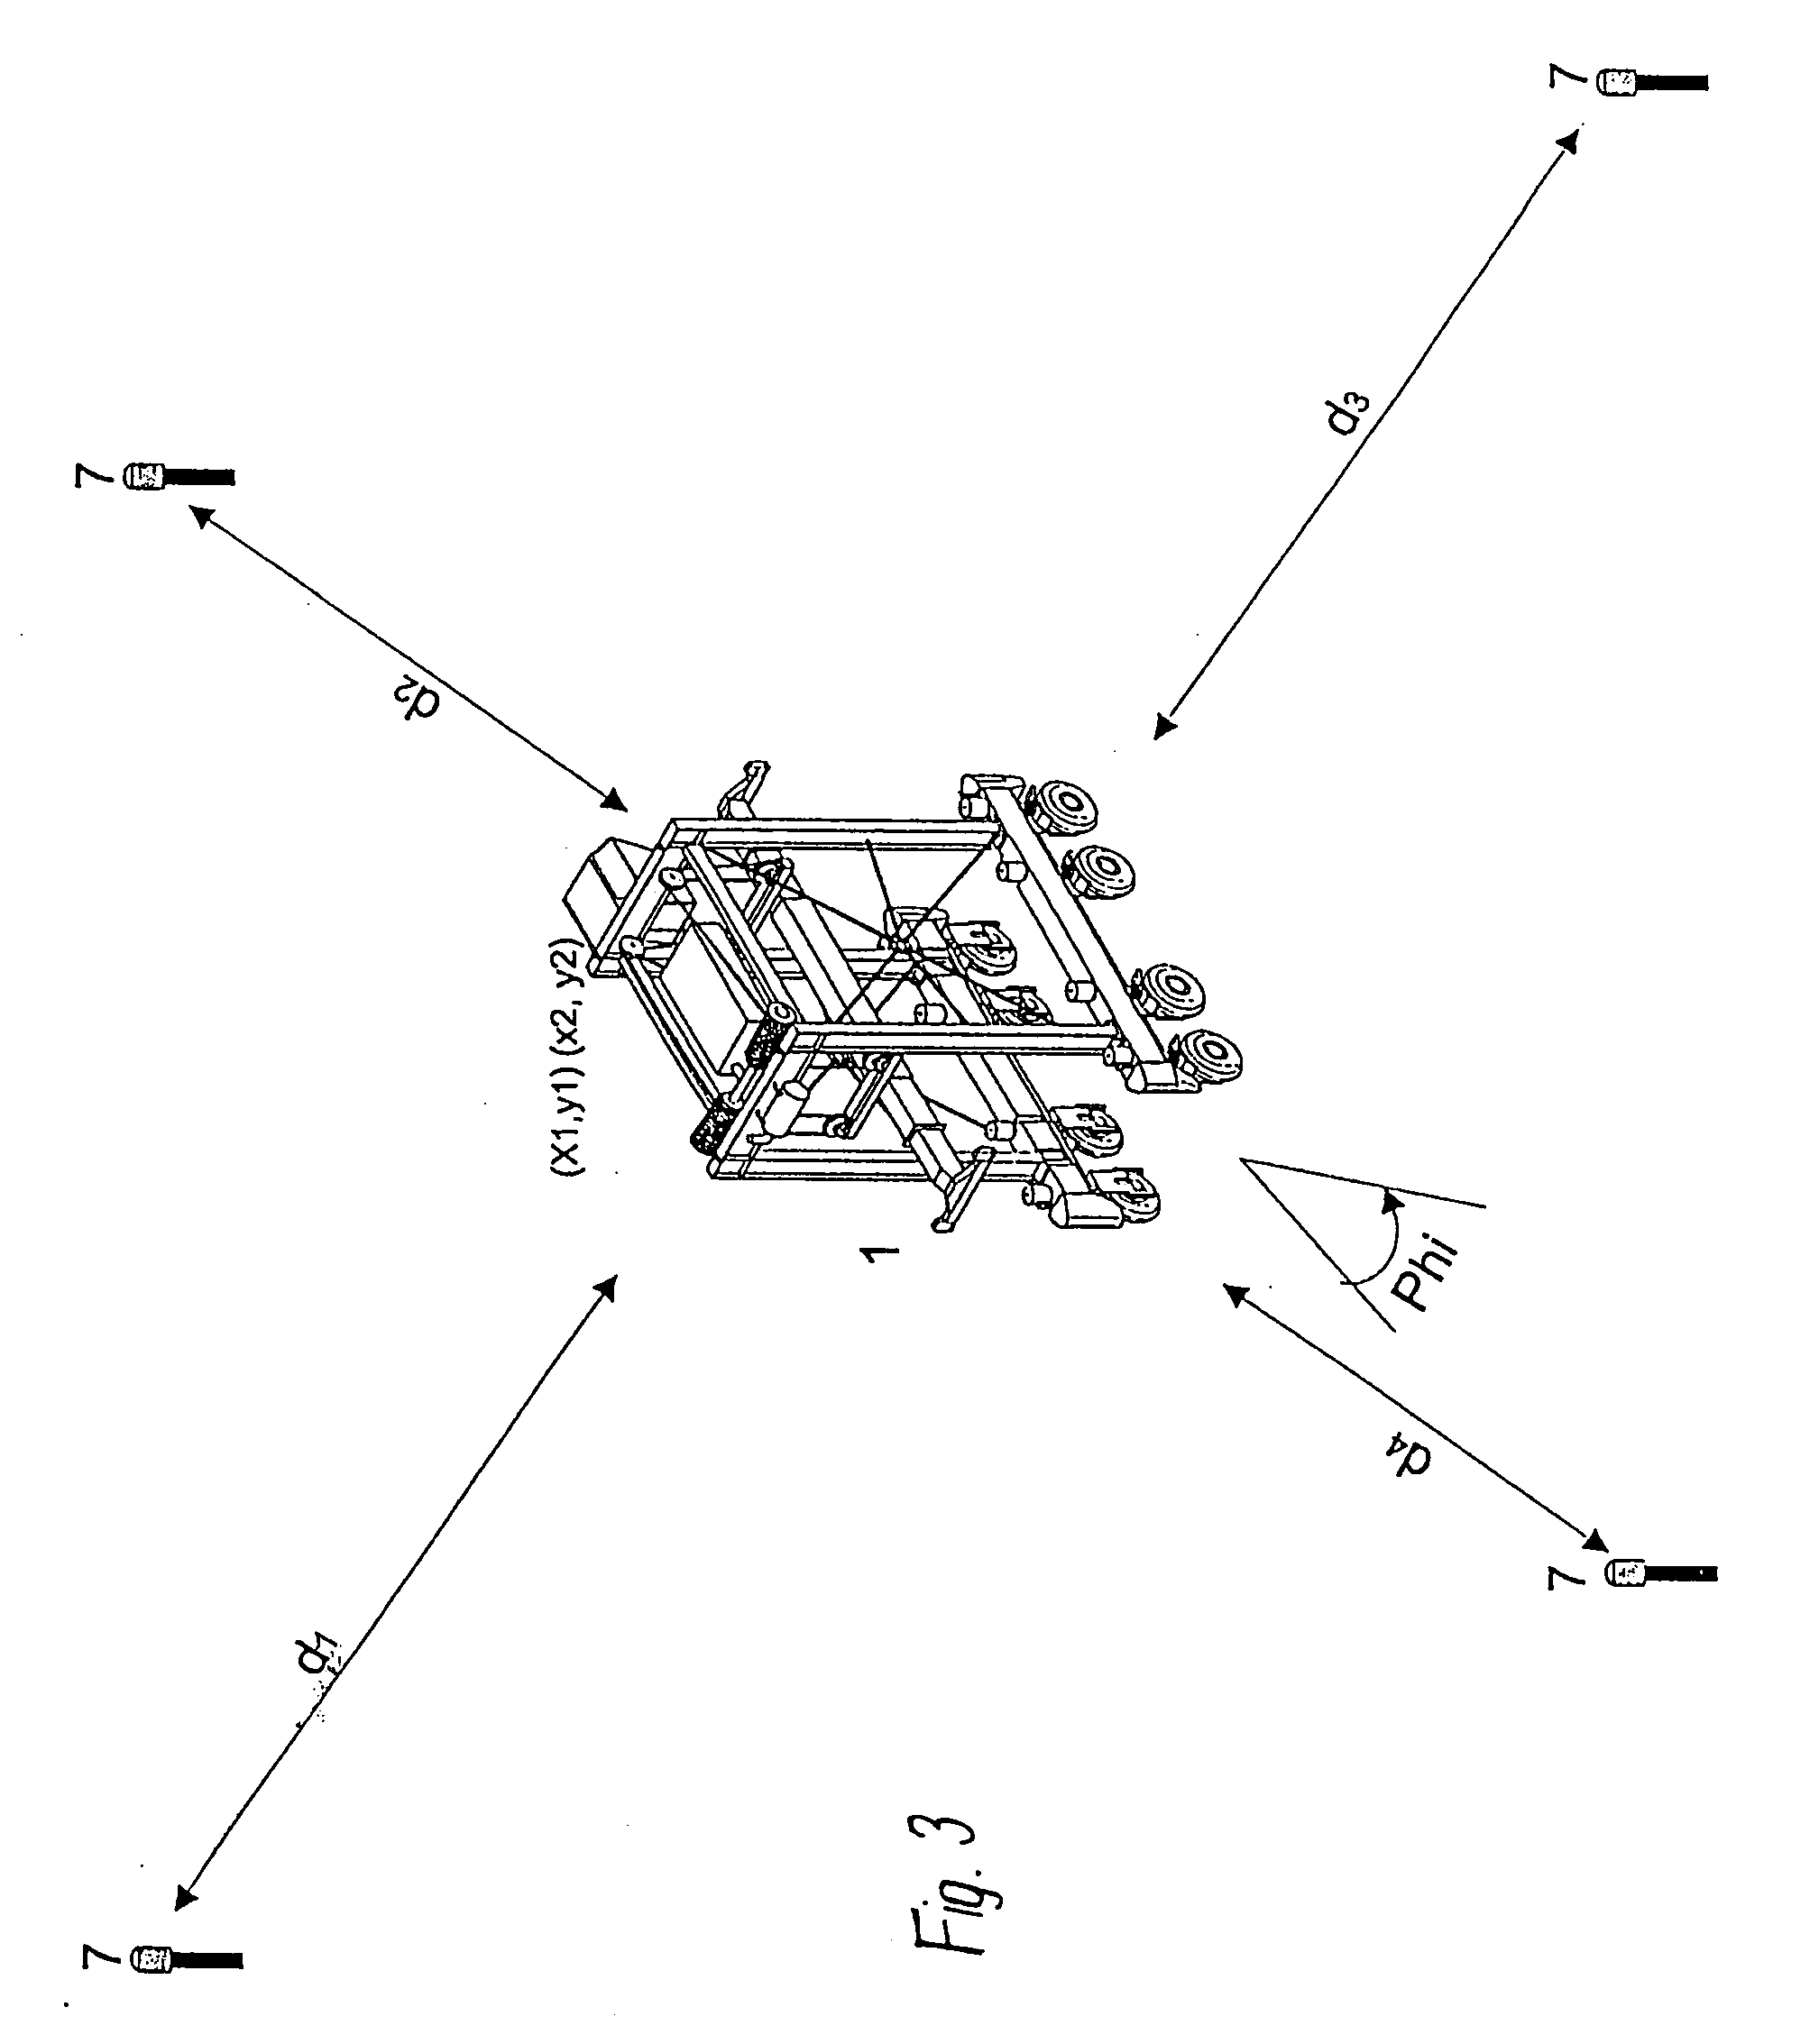 Fully automatic straddle carrier with local radio detection and laser steering